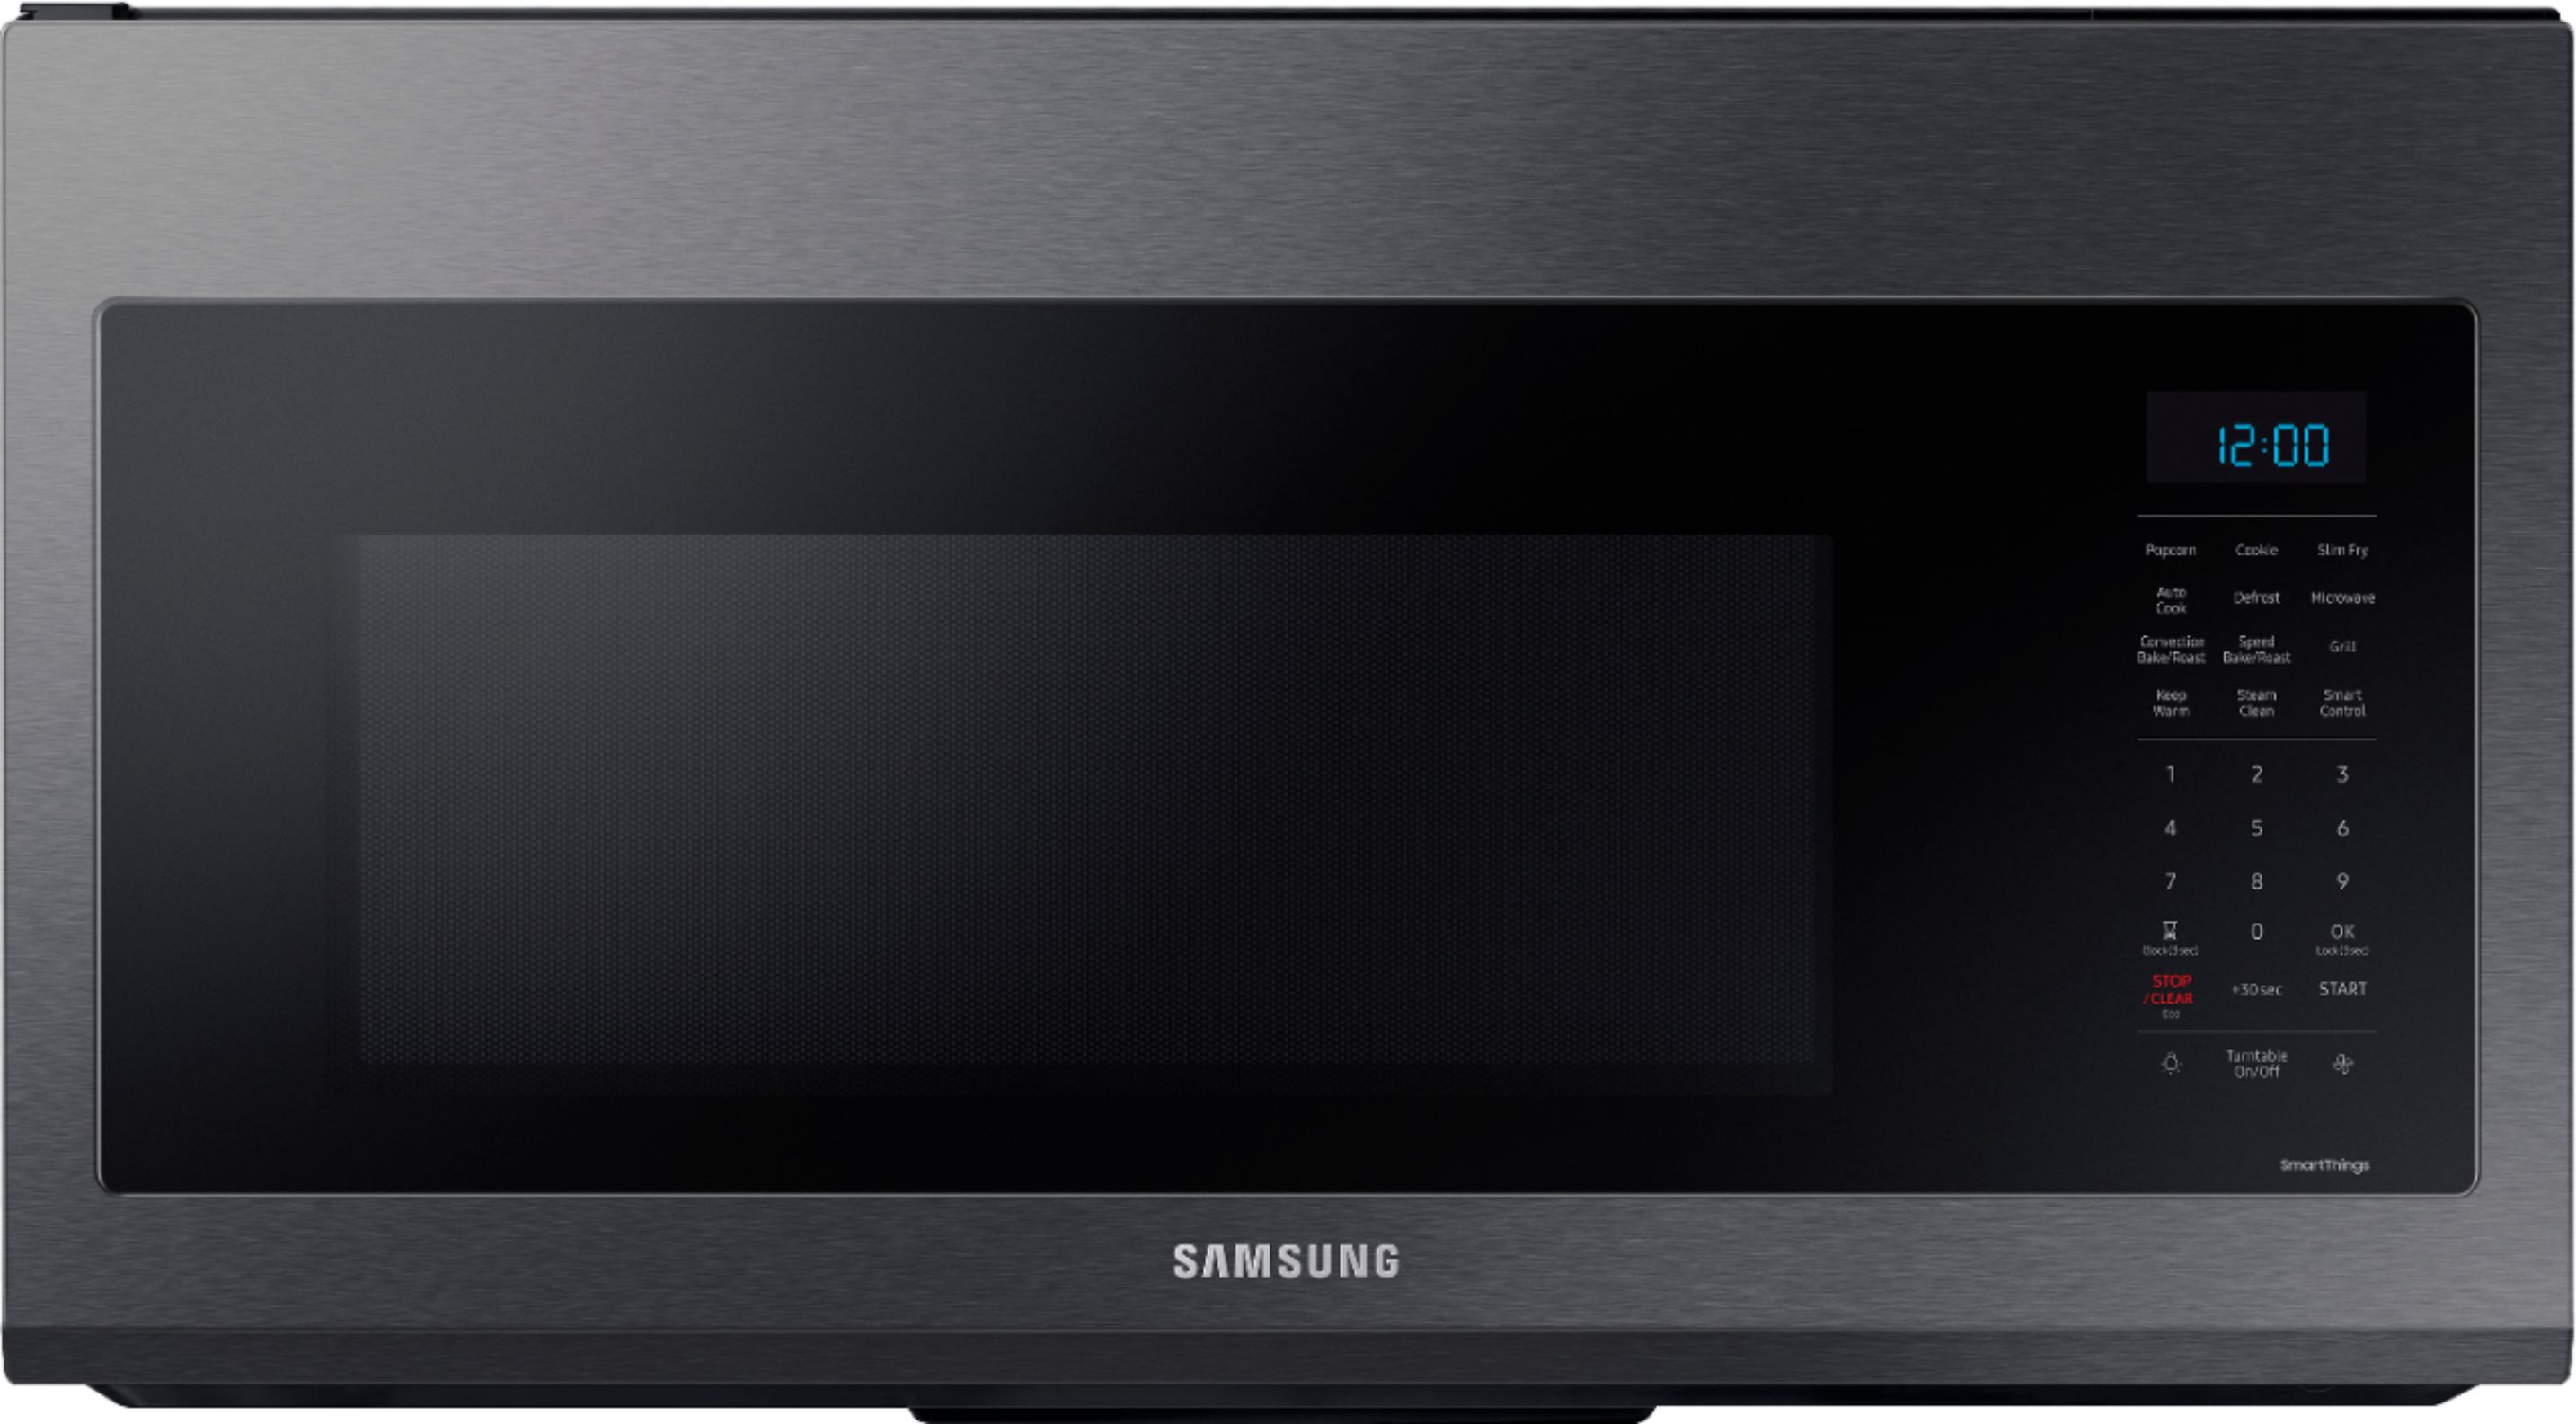 Samsung MS19M8020TG 1.9 Cu. ft. Black Stainless Countertop Microwave for Built-in Application